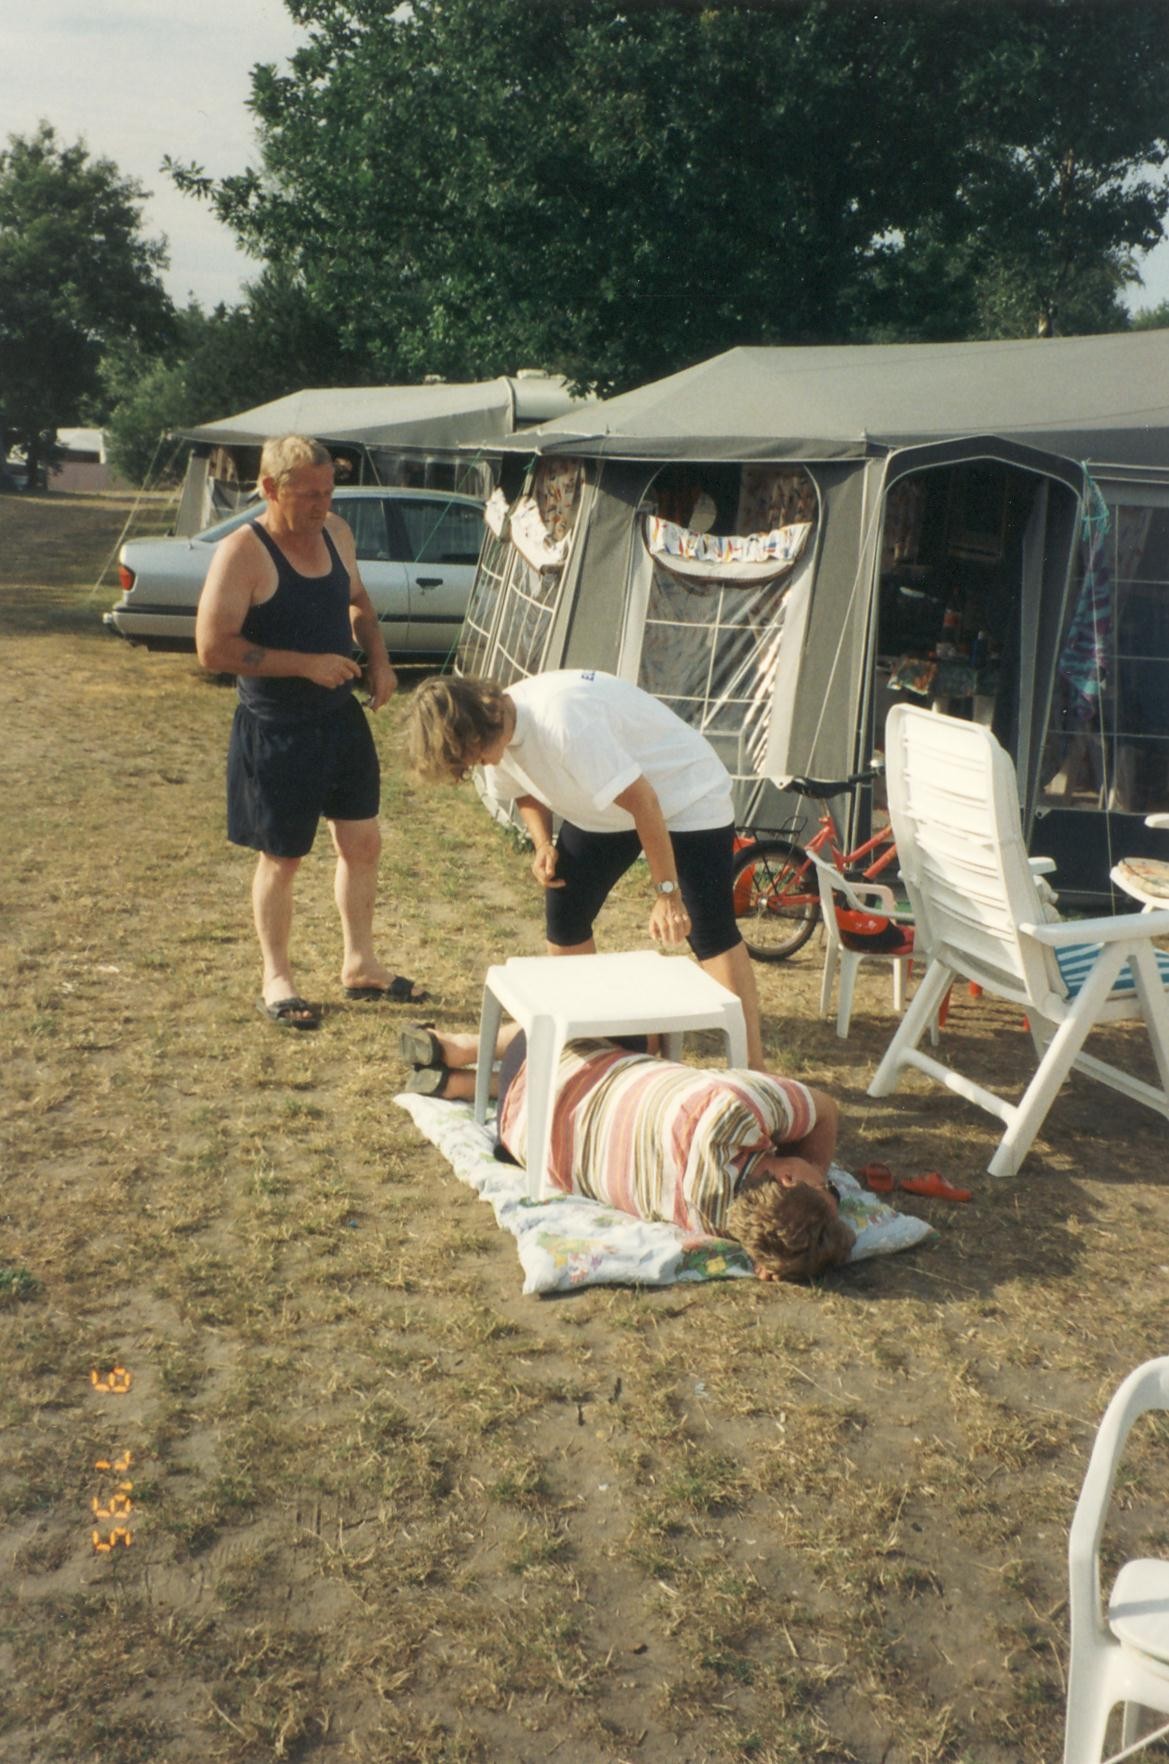 Scan15657 CAMPING LASSE SOVER 09-07-95